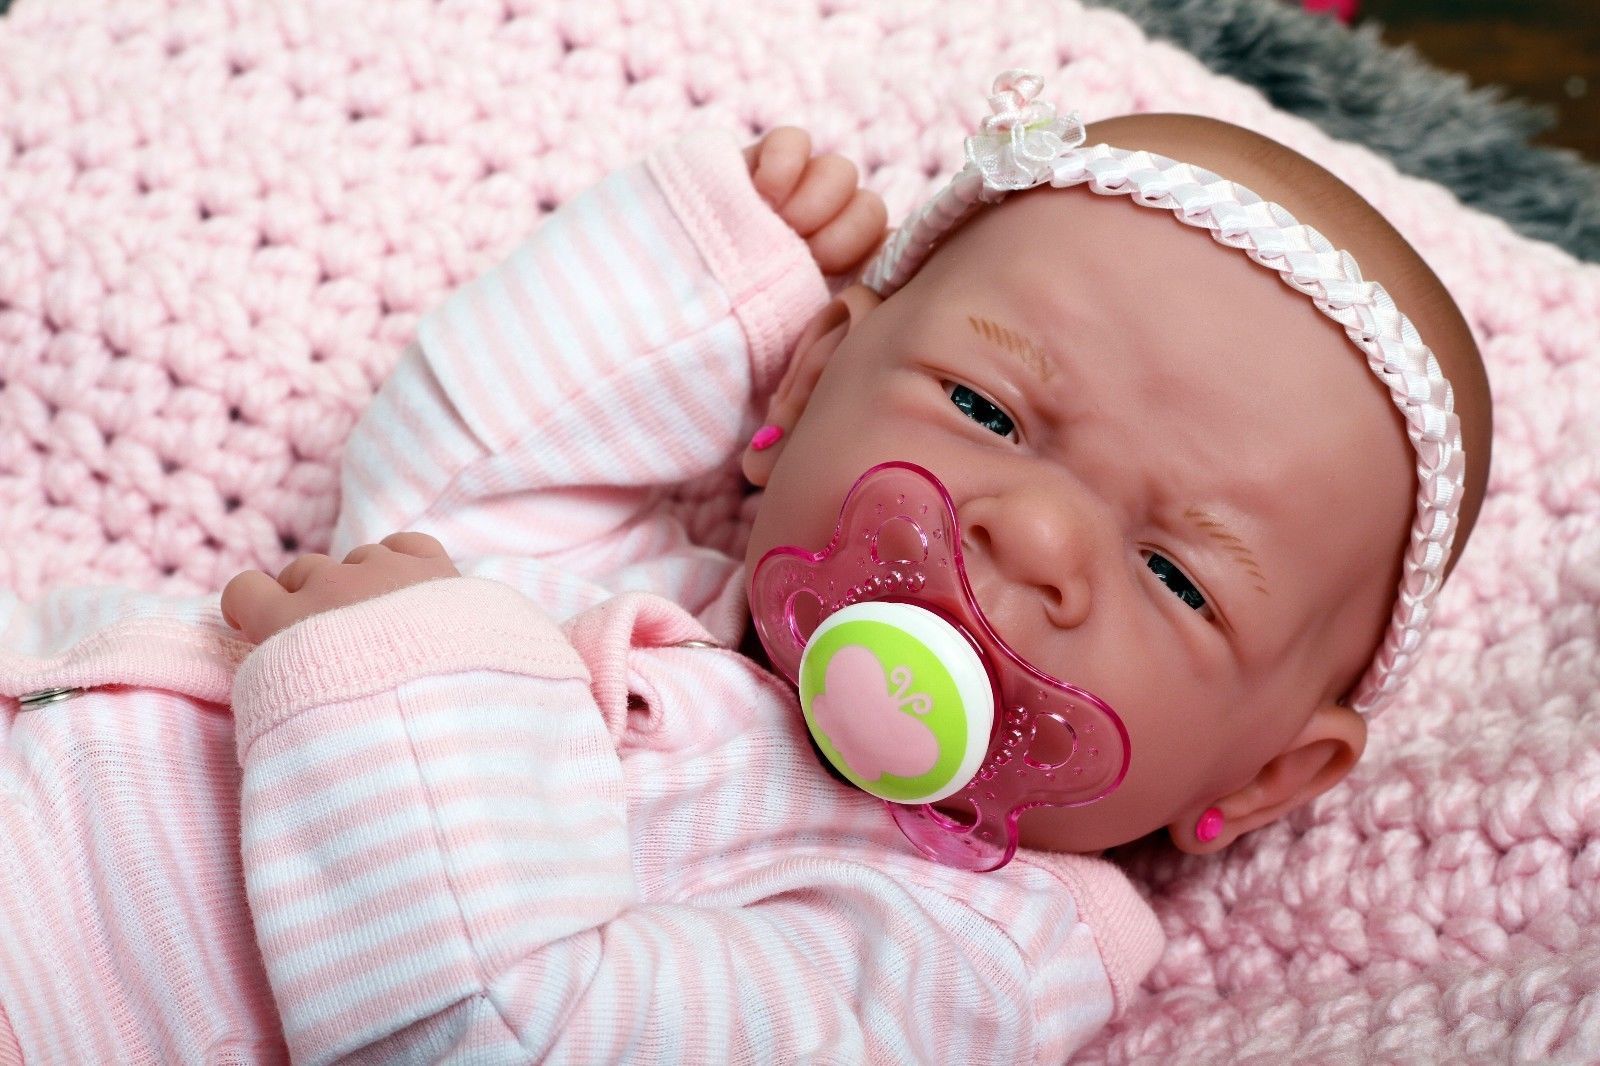 Cherishing New Life: Reborn Baby Dolls as Meaningful Gifts